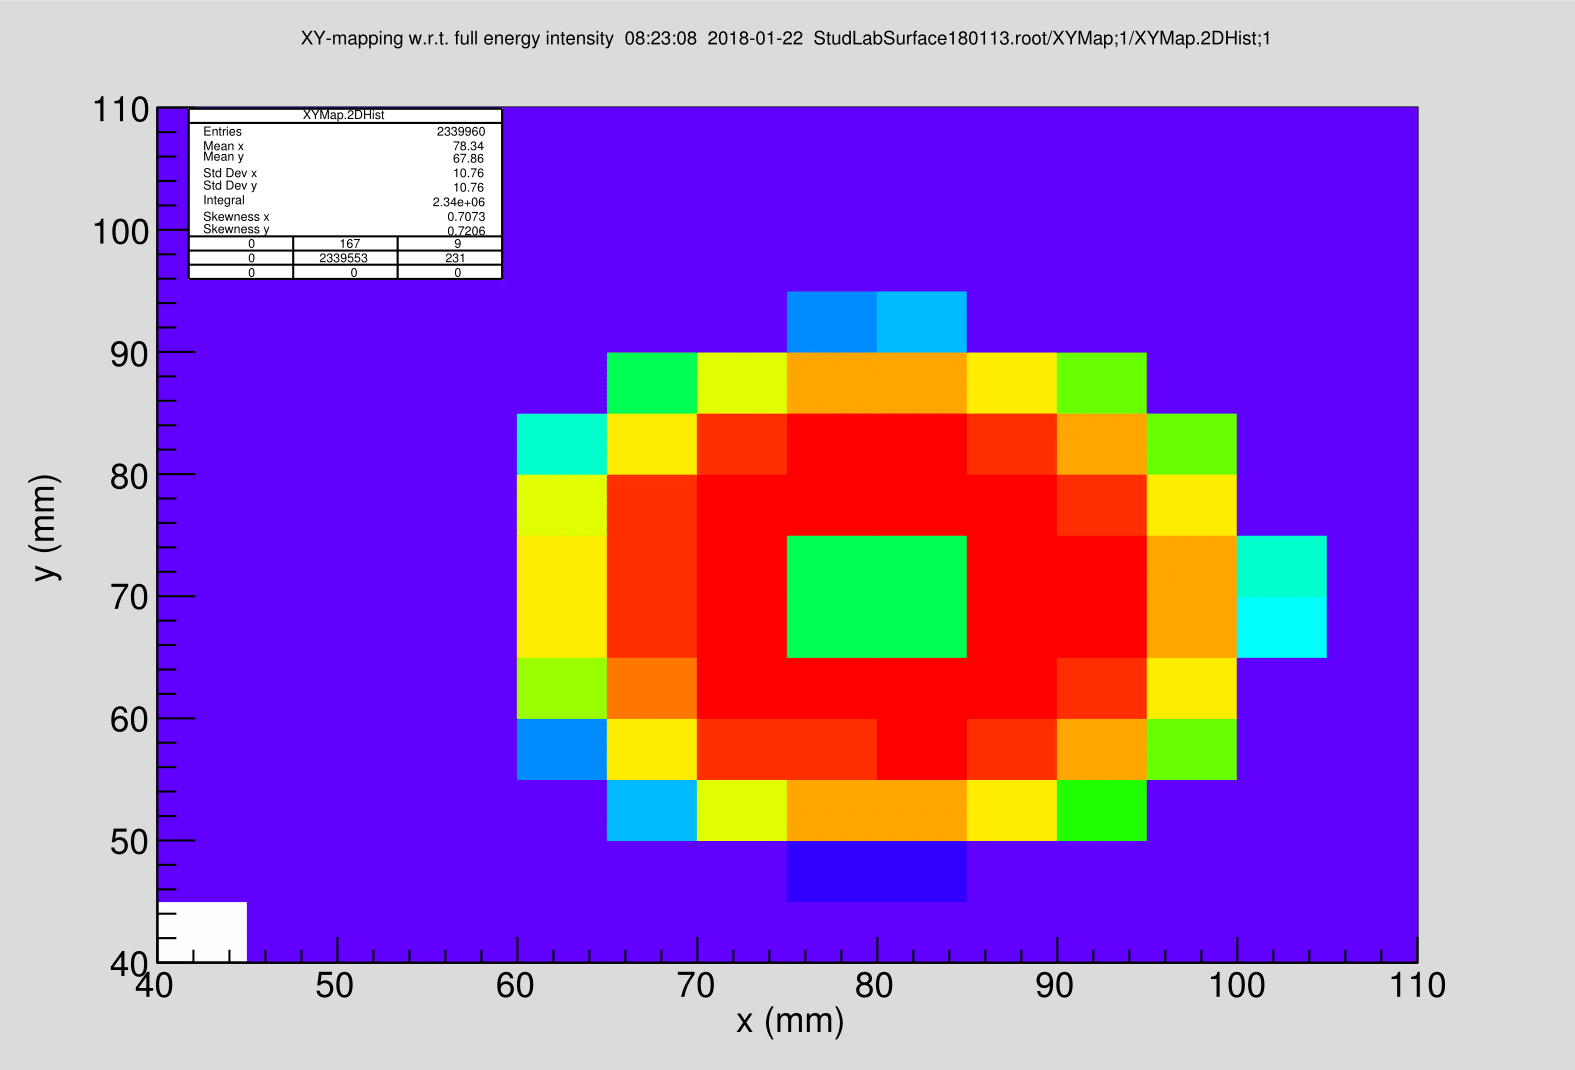 Raster scan of an in-house coaxial HPGe detector. Each (x, y) pixel represents a measured coordinate. The colour indicate the number of photons that were detected for each coordinate, going from purple to red with increasing counts.